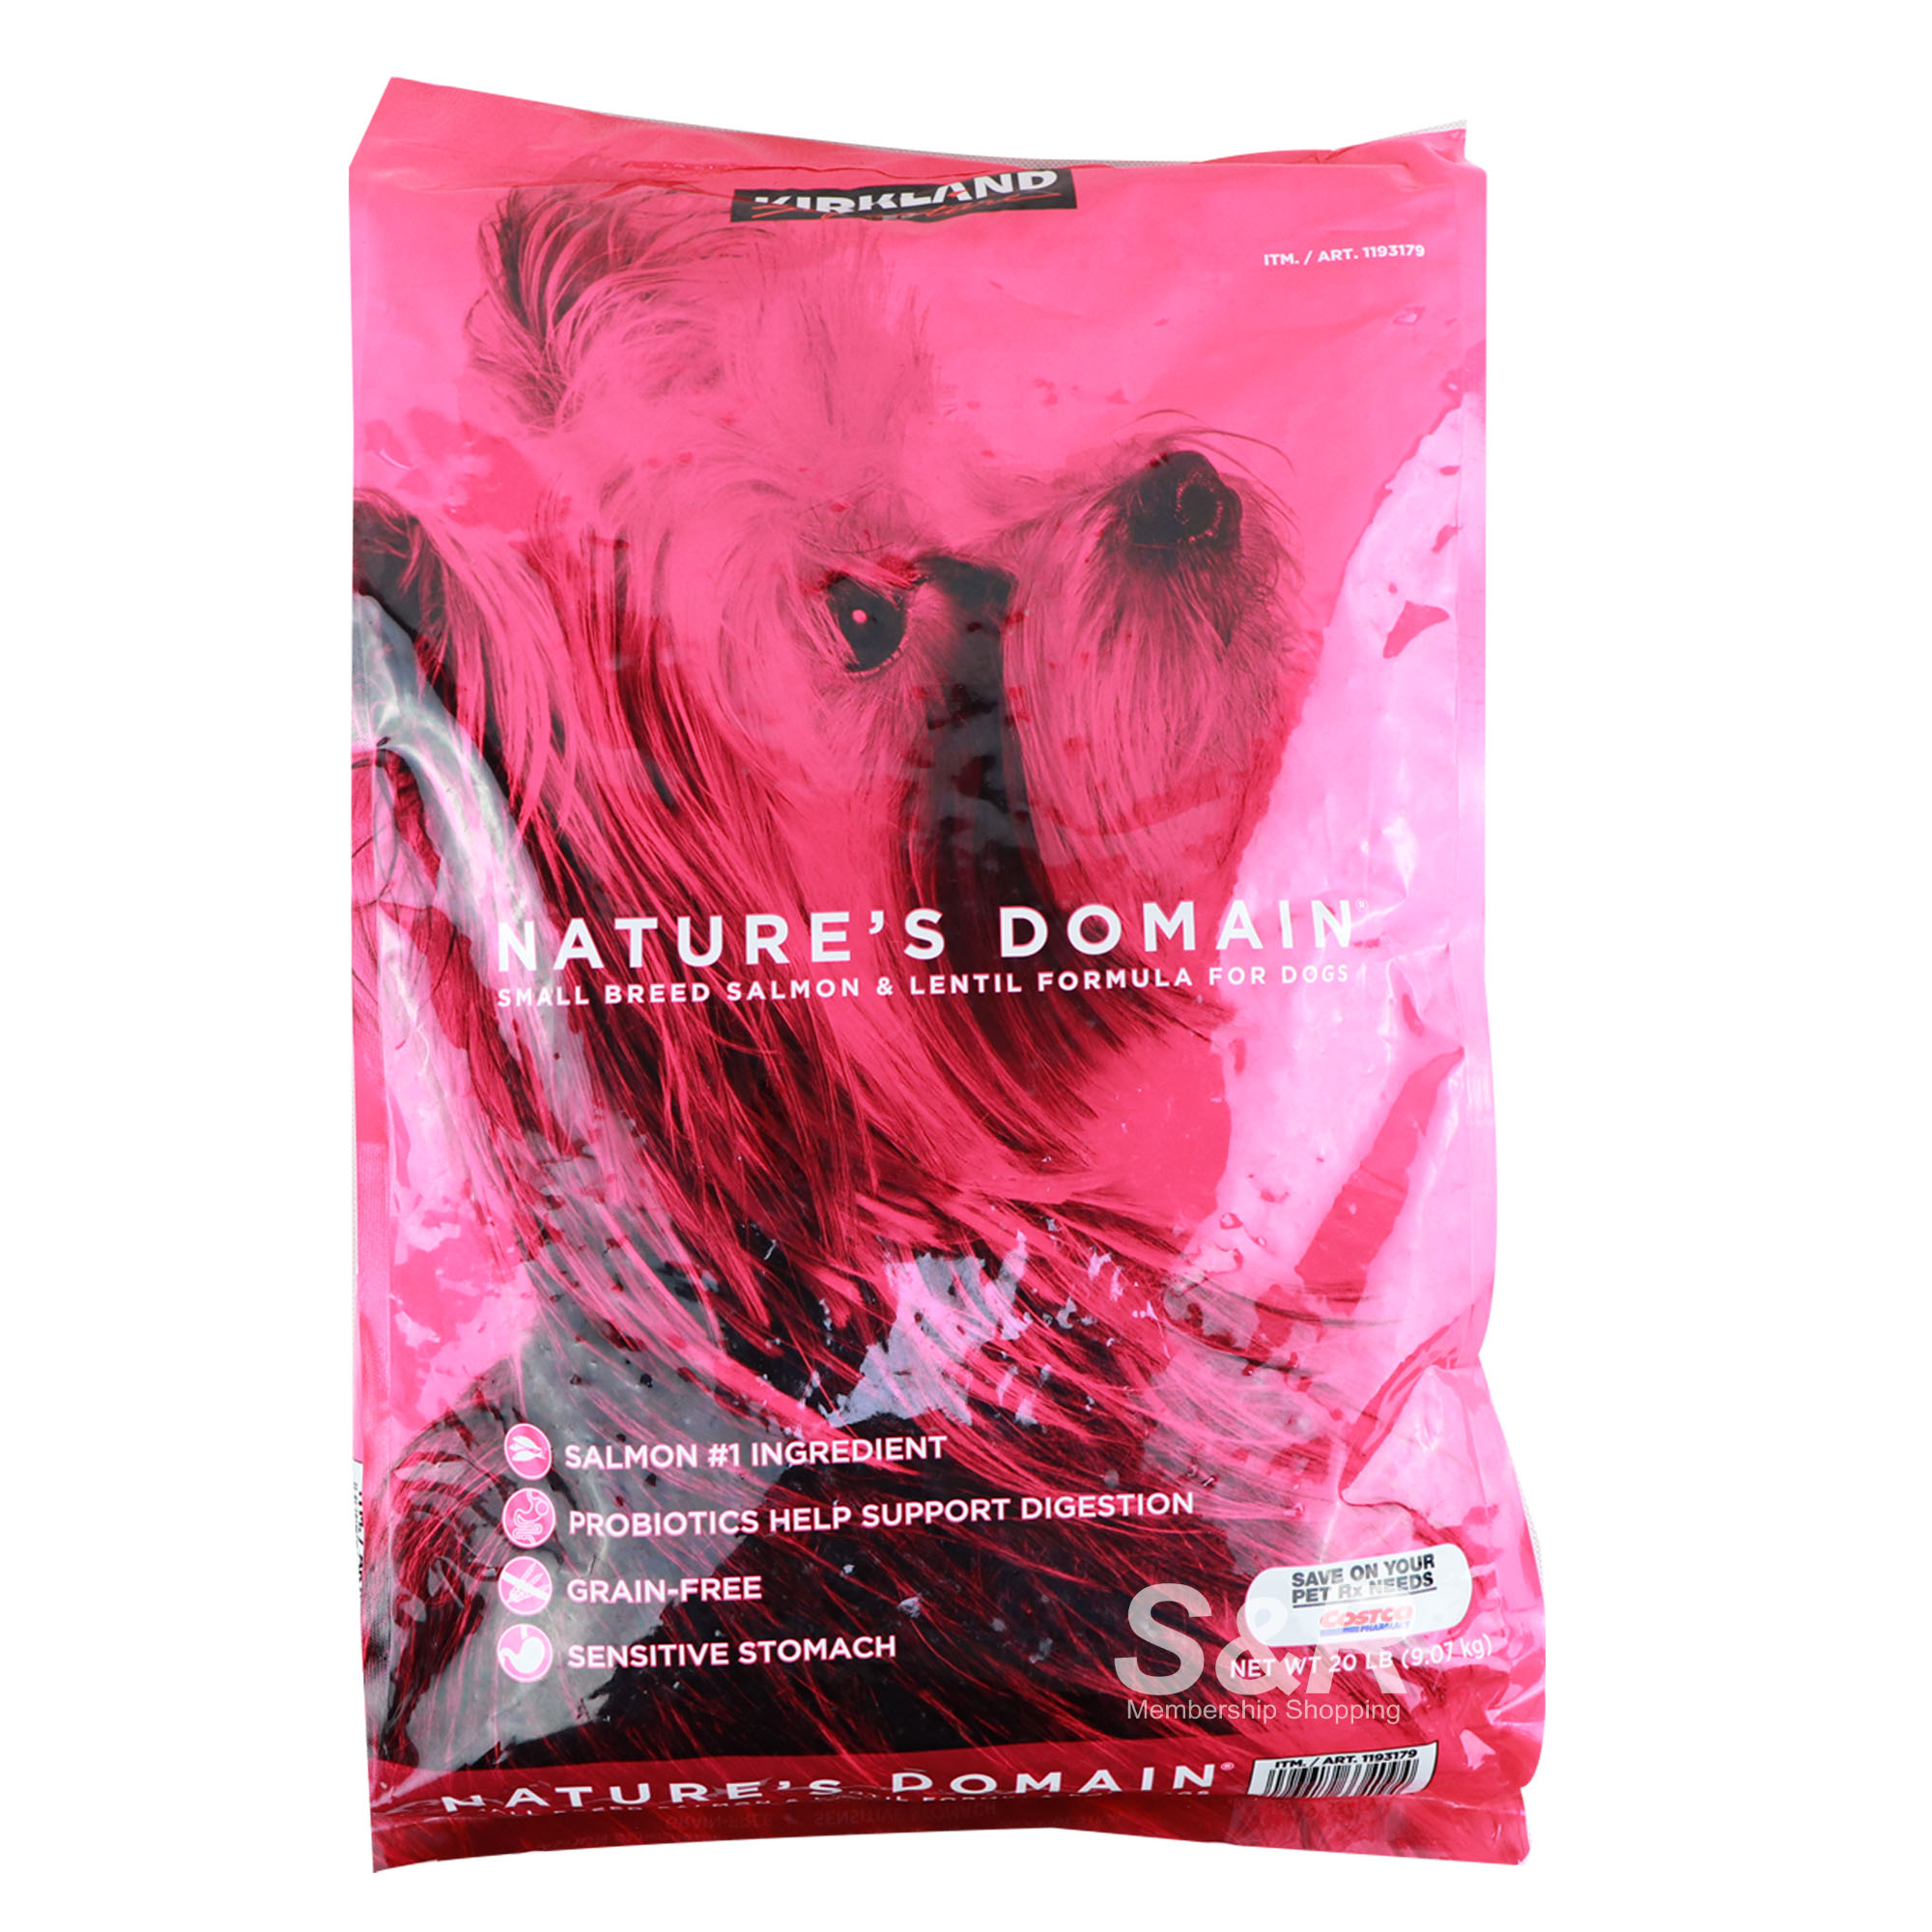 Kirkland Signature Nature's Domain Small Breed Salmon and Lentil Formula for Dogs 9.19kg